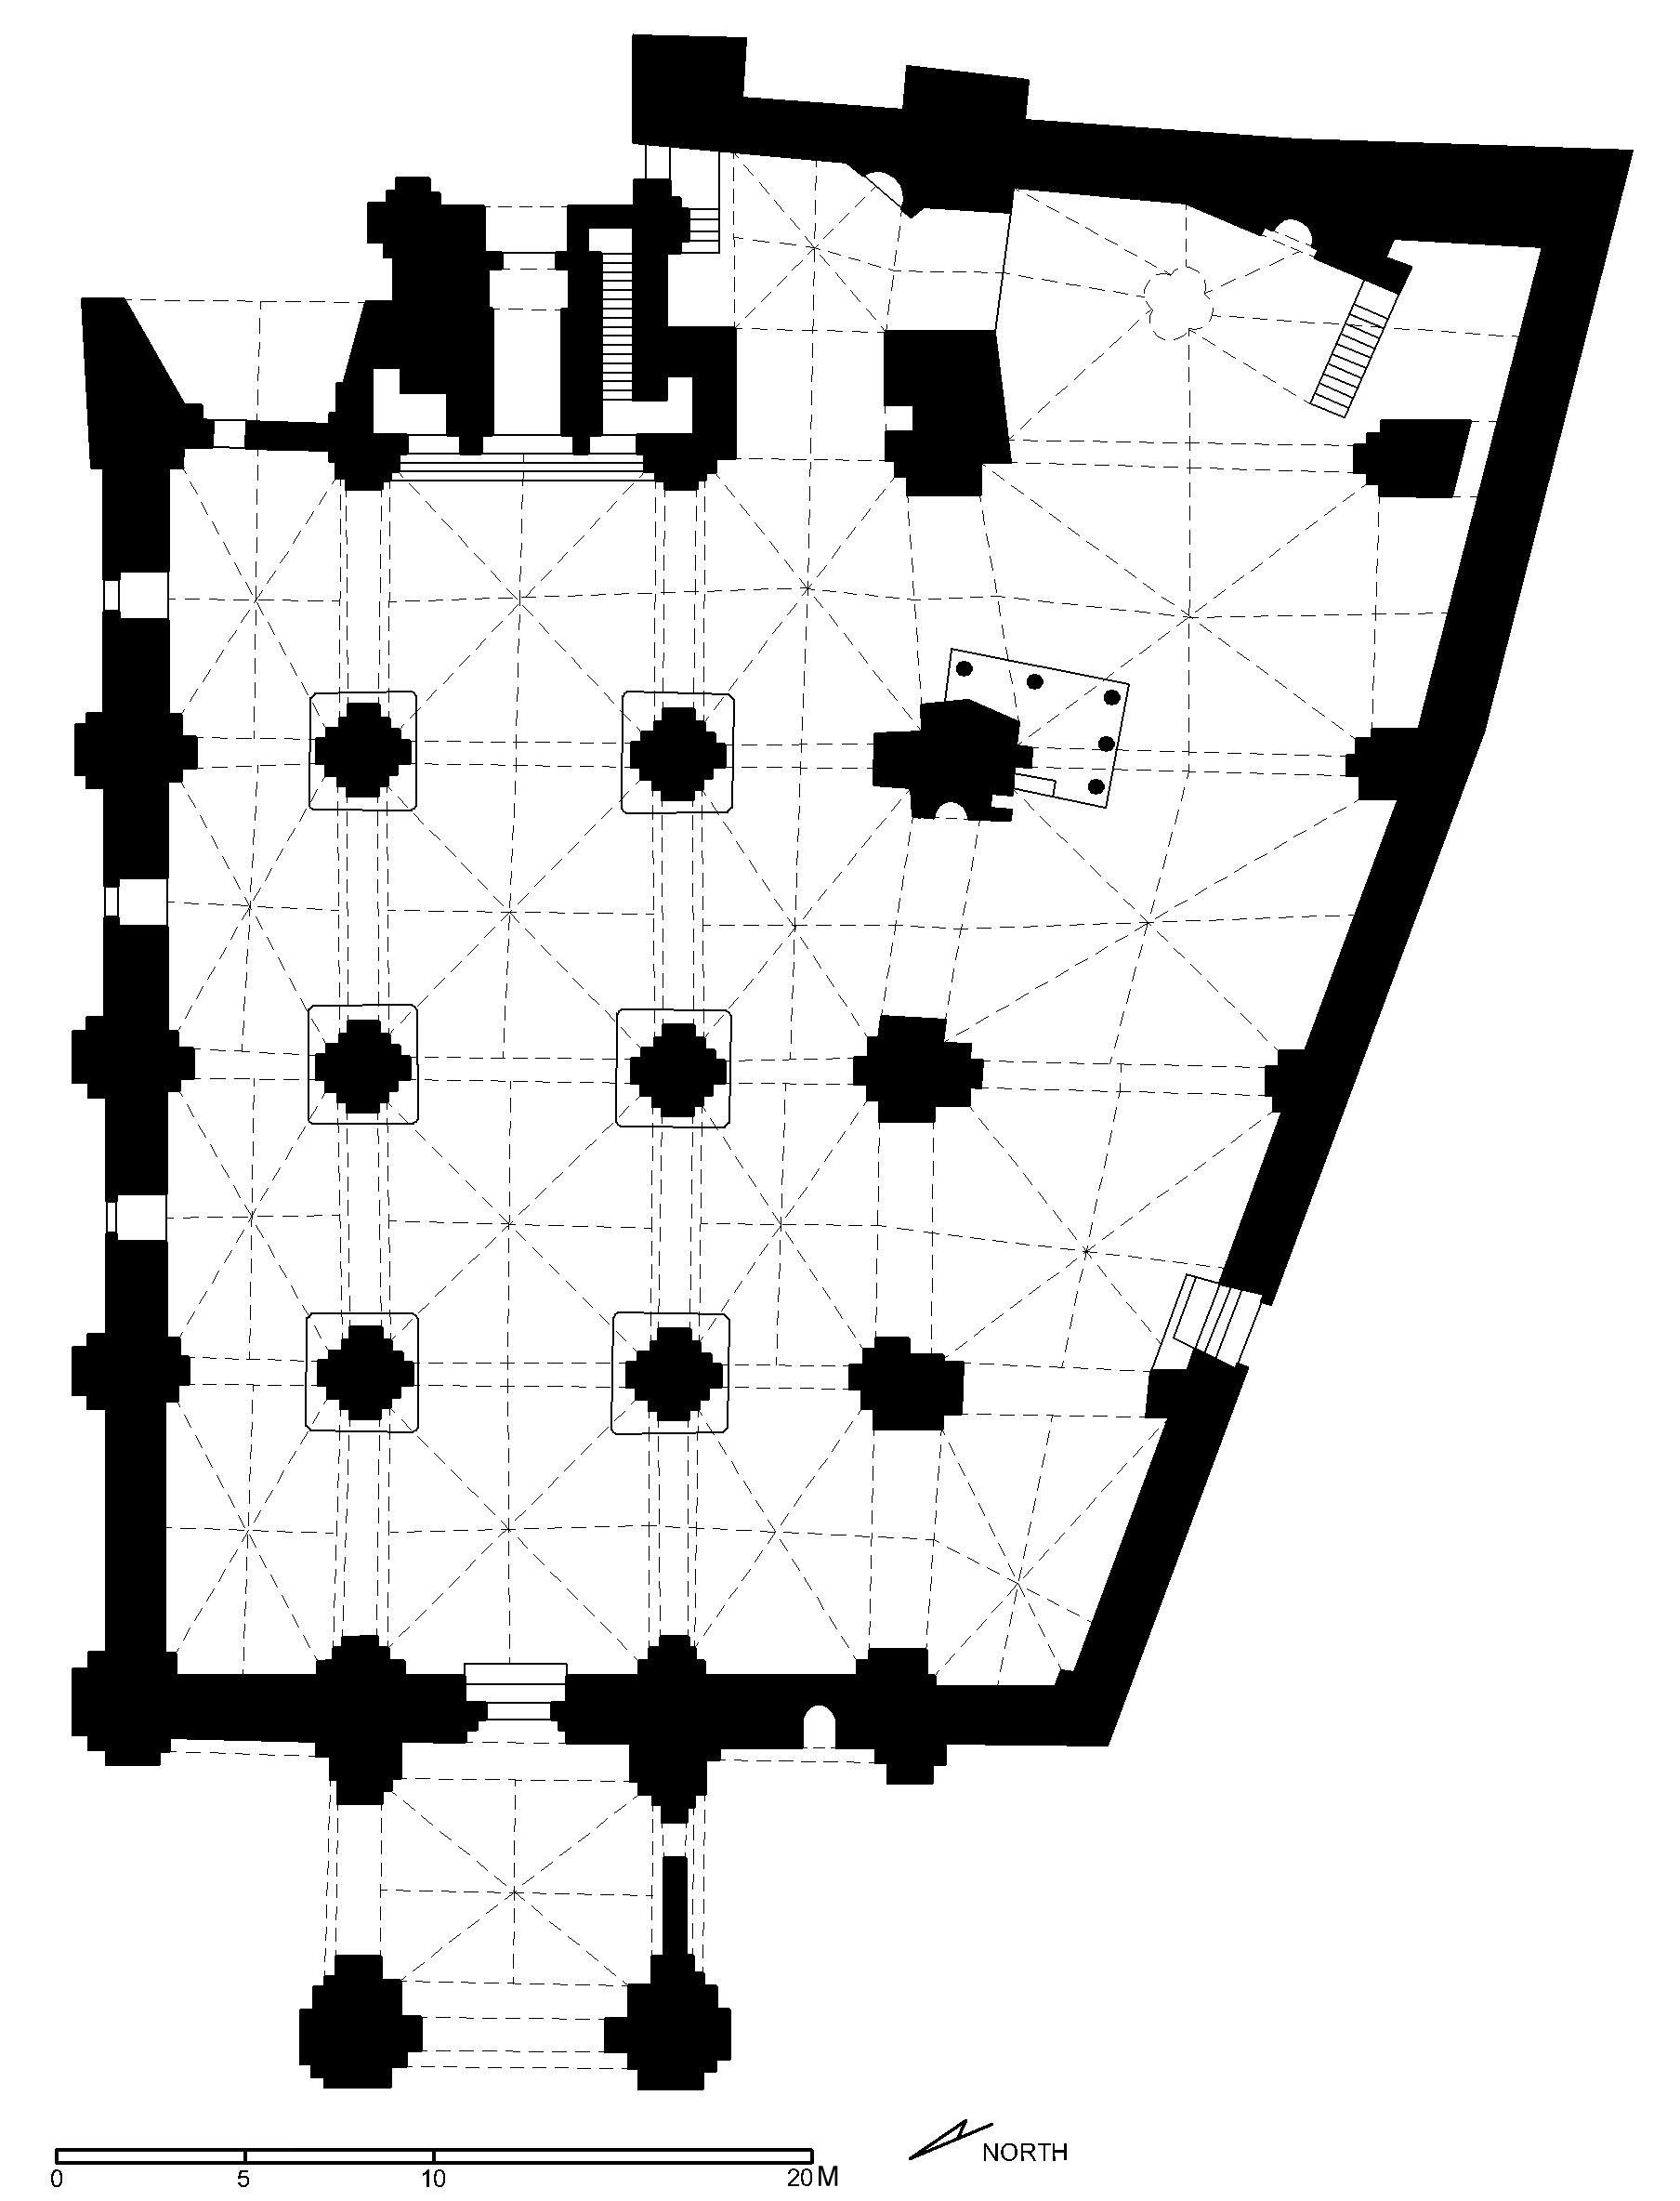 Jami' Gaza al-Kabir - Floor plan of mosque in AutoCad2000 format. Click the download button to download a zipped file containing the .dwg file.. Dark shaded walls were adapted from a Crusader church on the site (after Meinecke) 